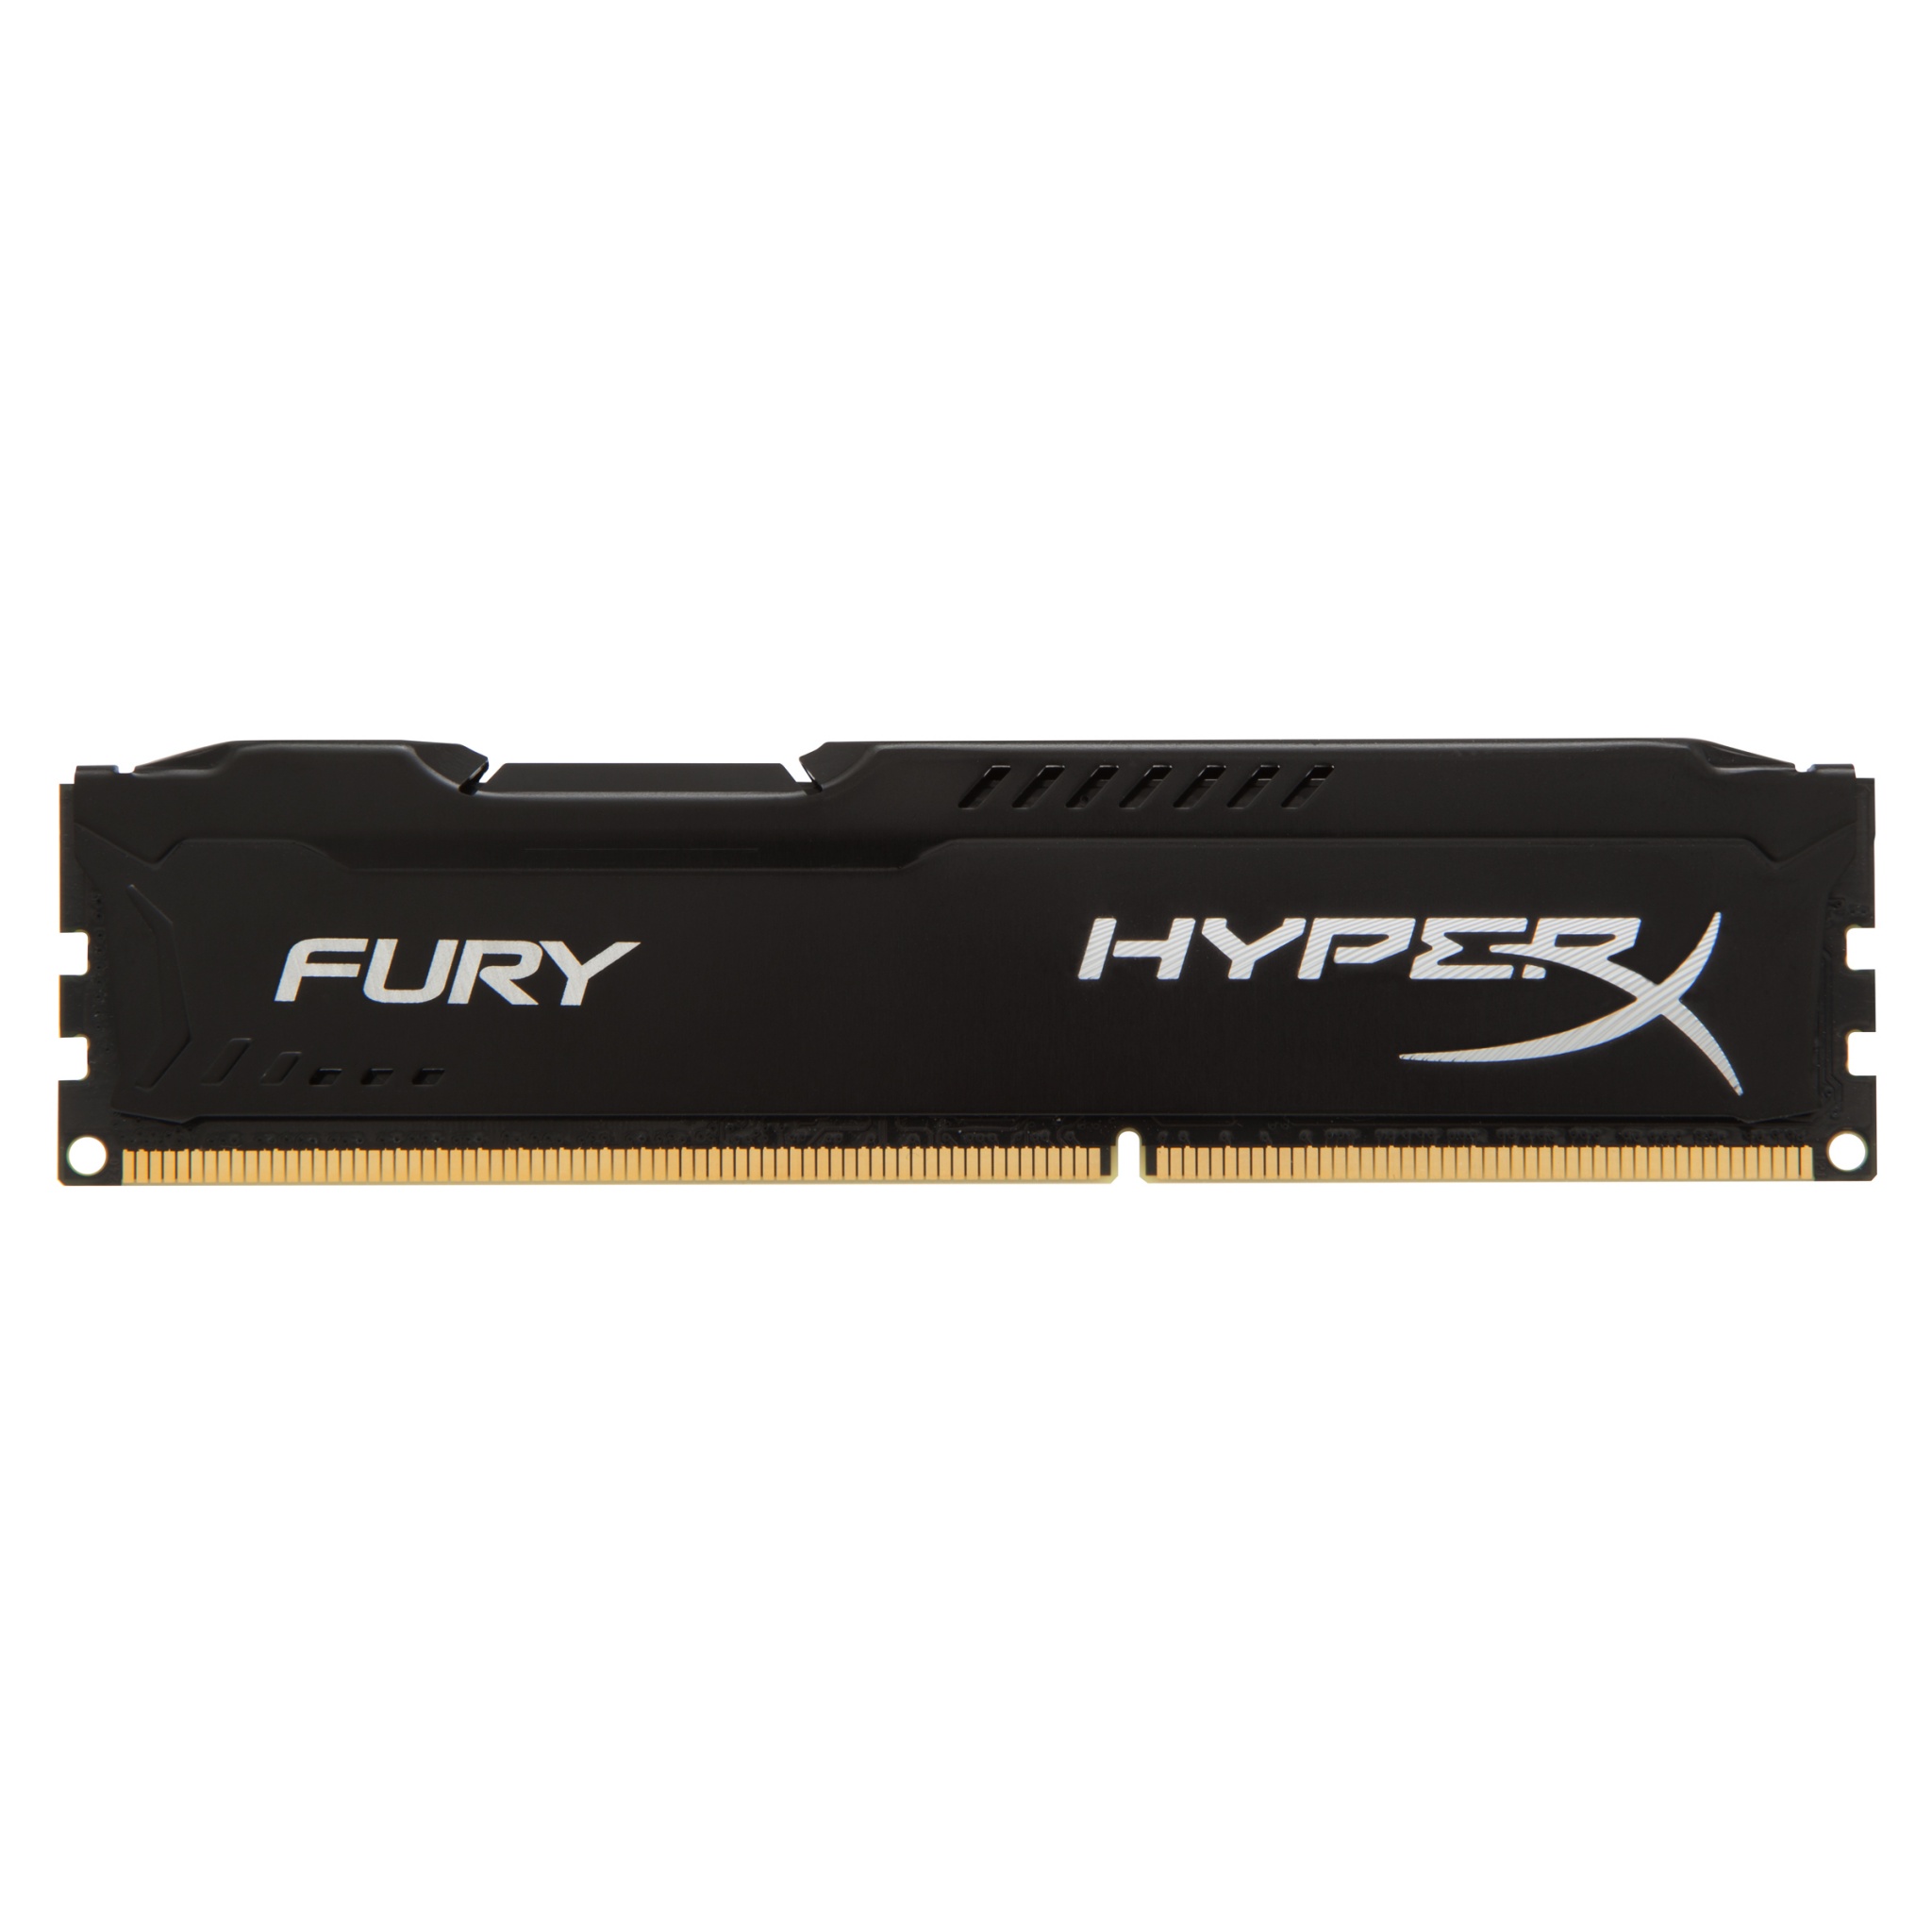 more and more Tropical syndrome 8GB Kingston HyperX Fury DDR3 1333MHz CL9 Dual Channel Kit (2x 4GB) - Black